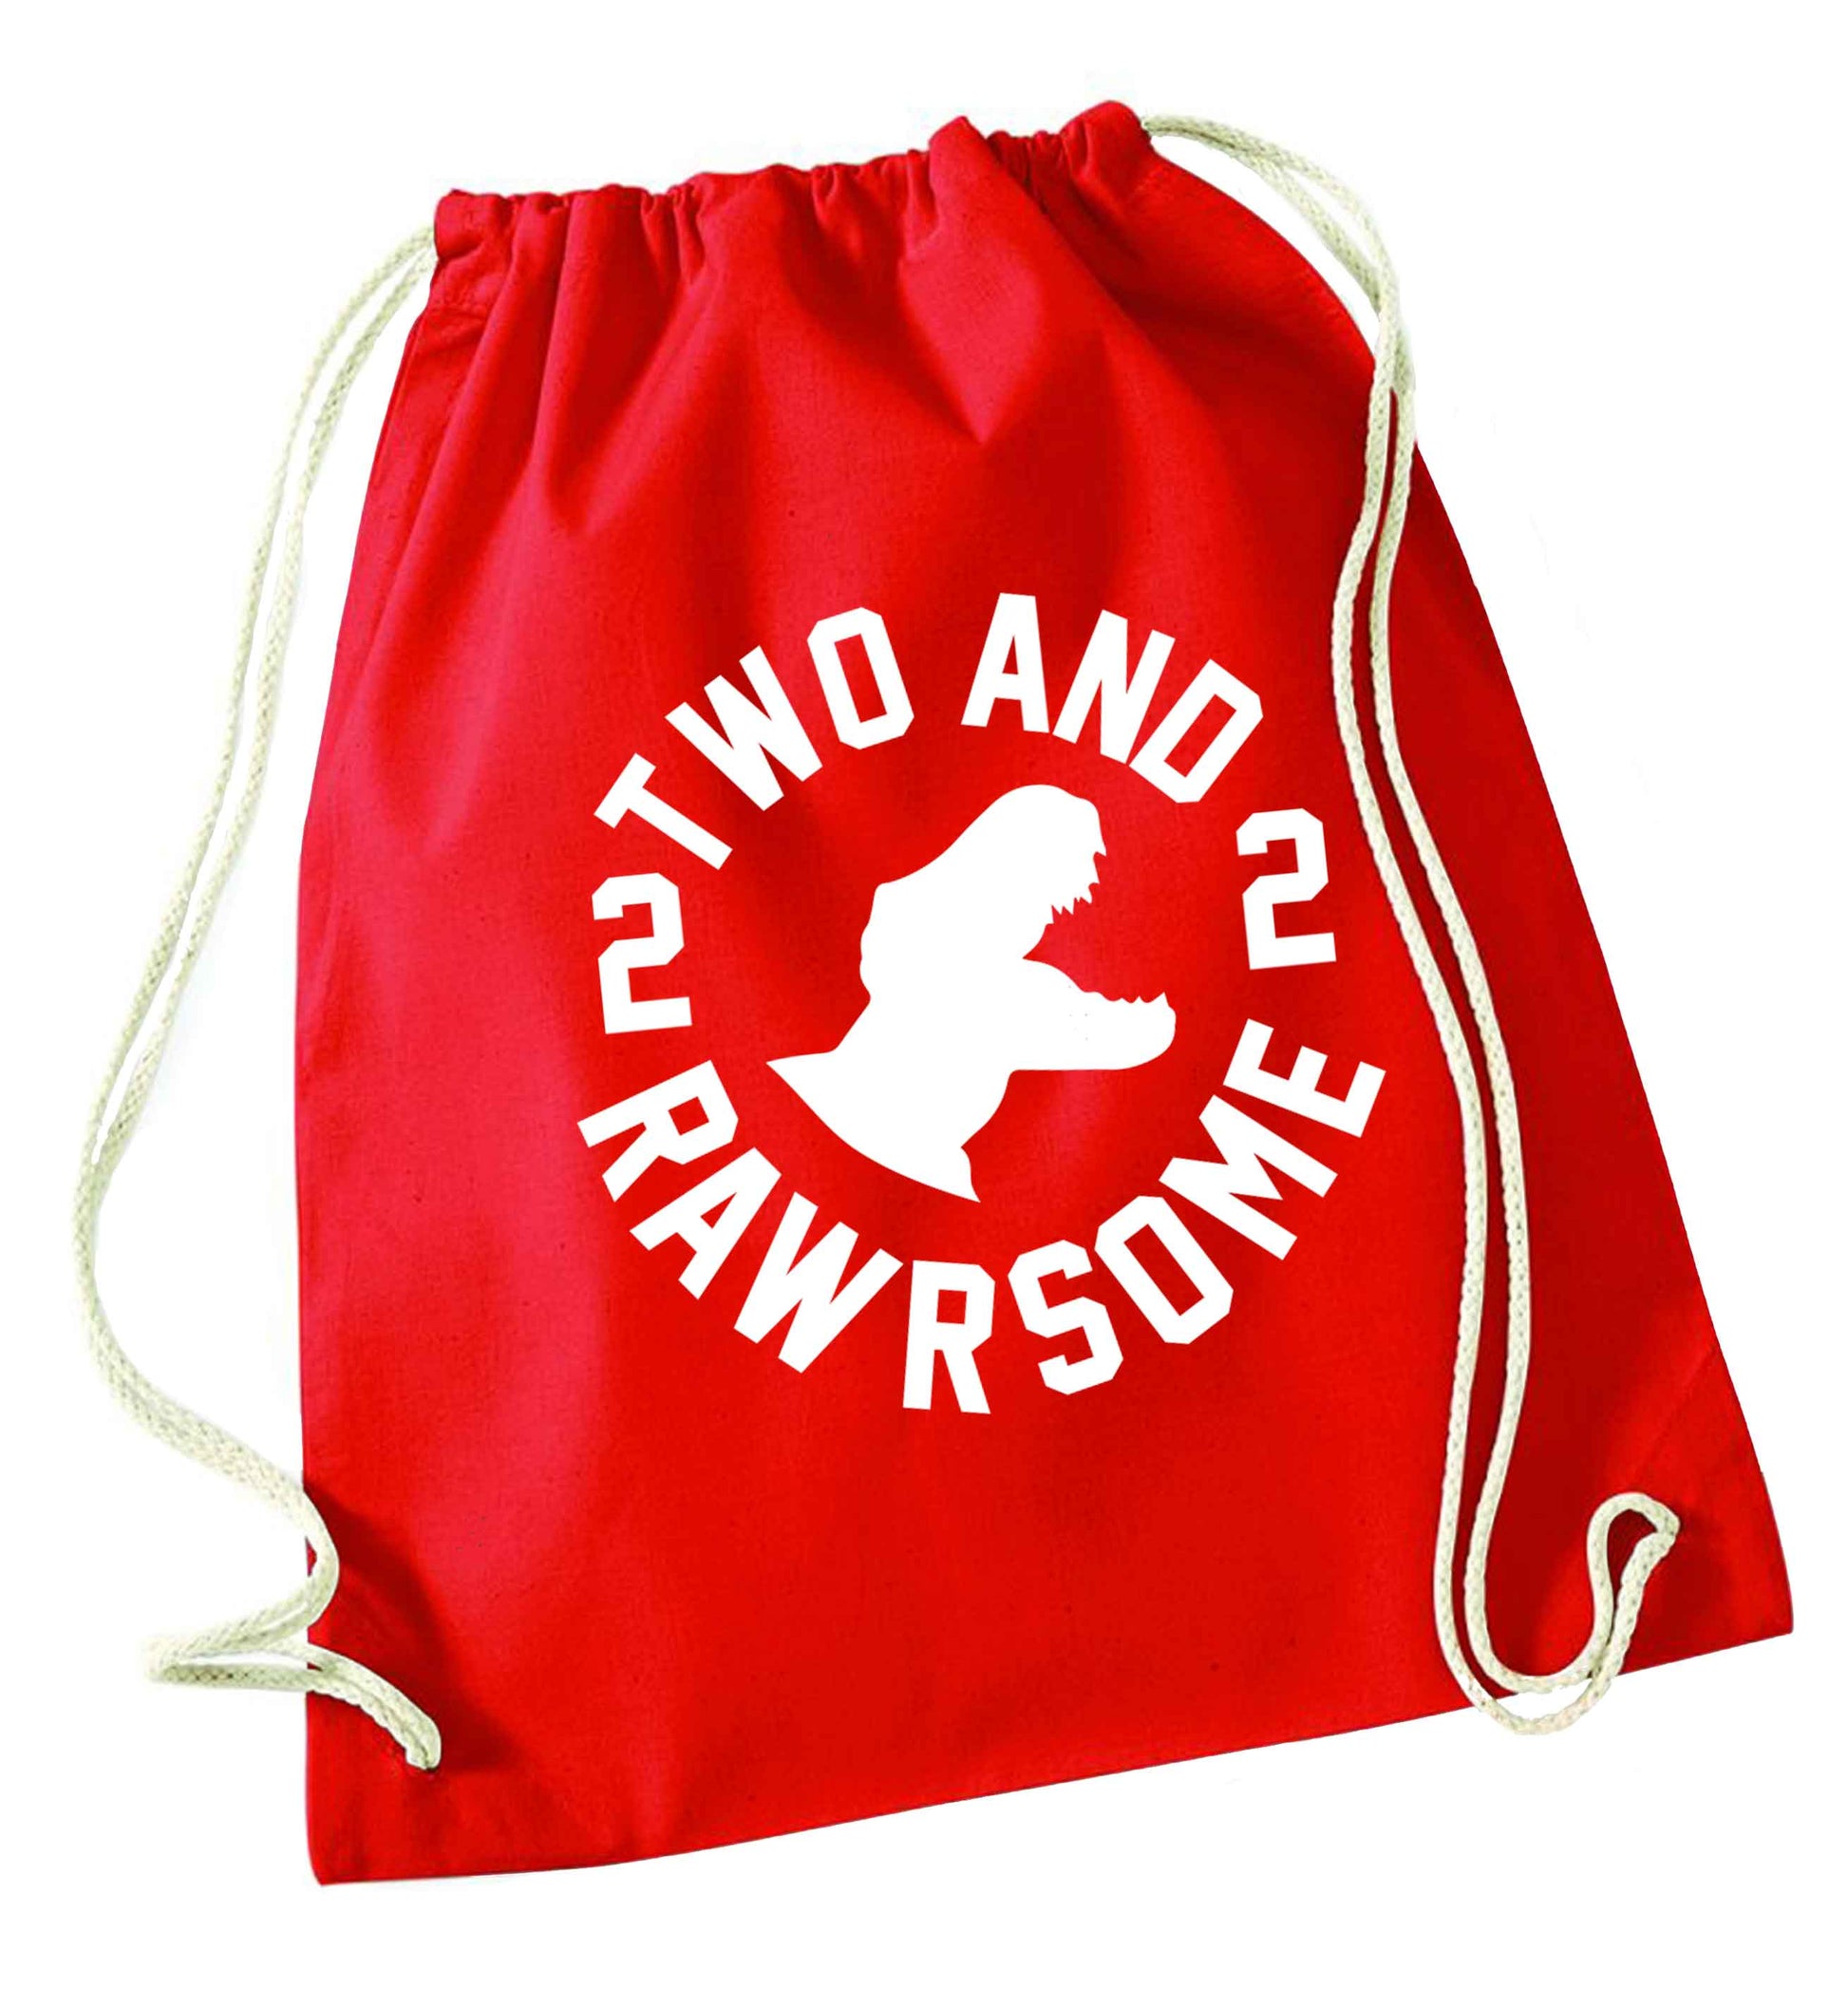 Two and rawrsome red drawstring bag 